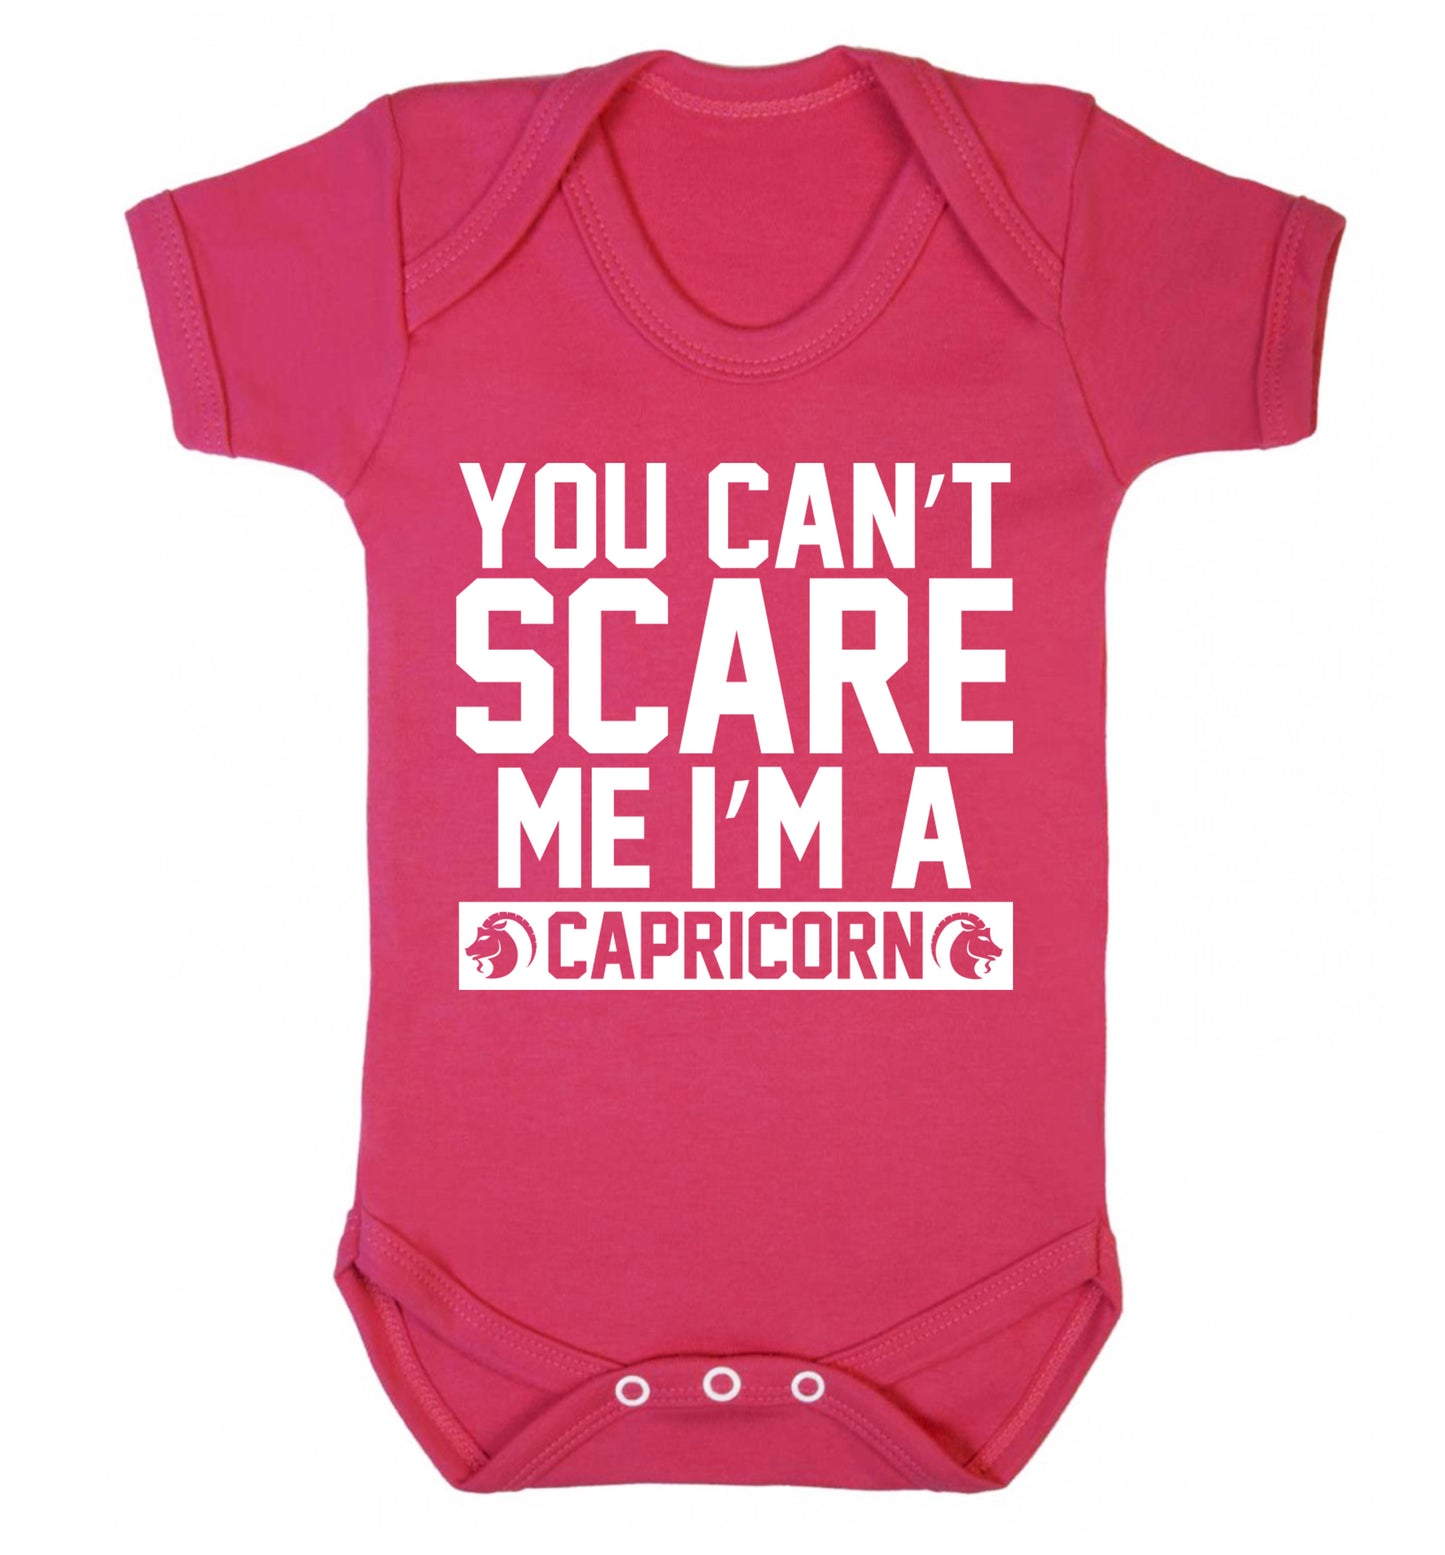 You can't scare me I'm a capricorn Baby Vest dark pink 18-24 months